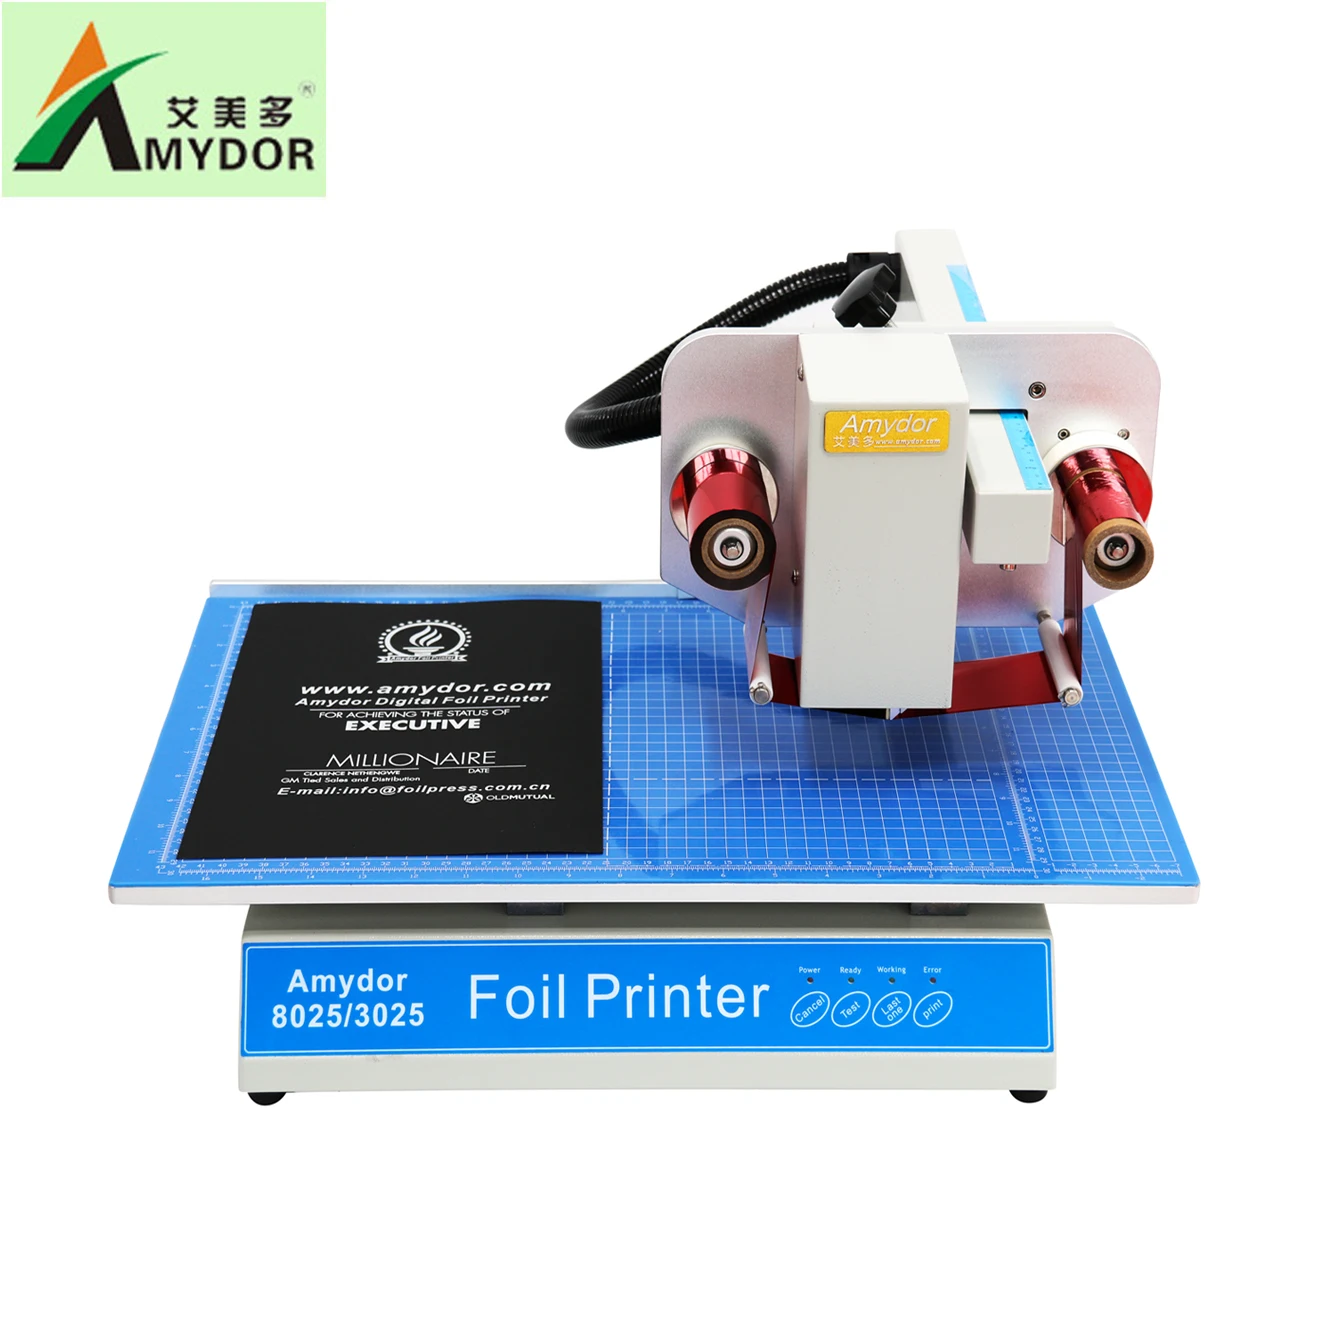 

Amydor amd8025 digital hot foil printer machines for printing shop hardcover, paper bag, phone case, diary cover, card cheap CE